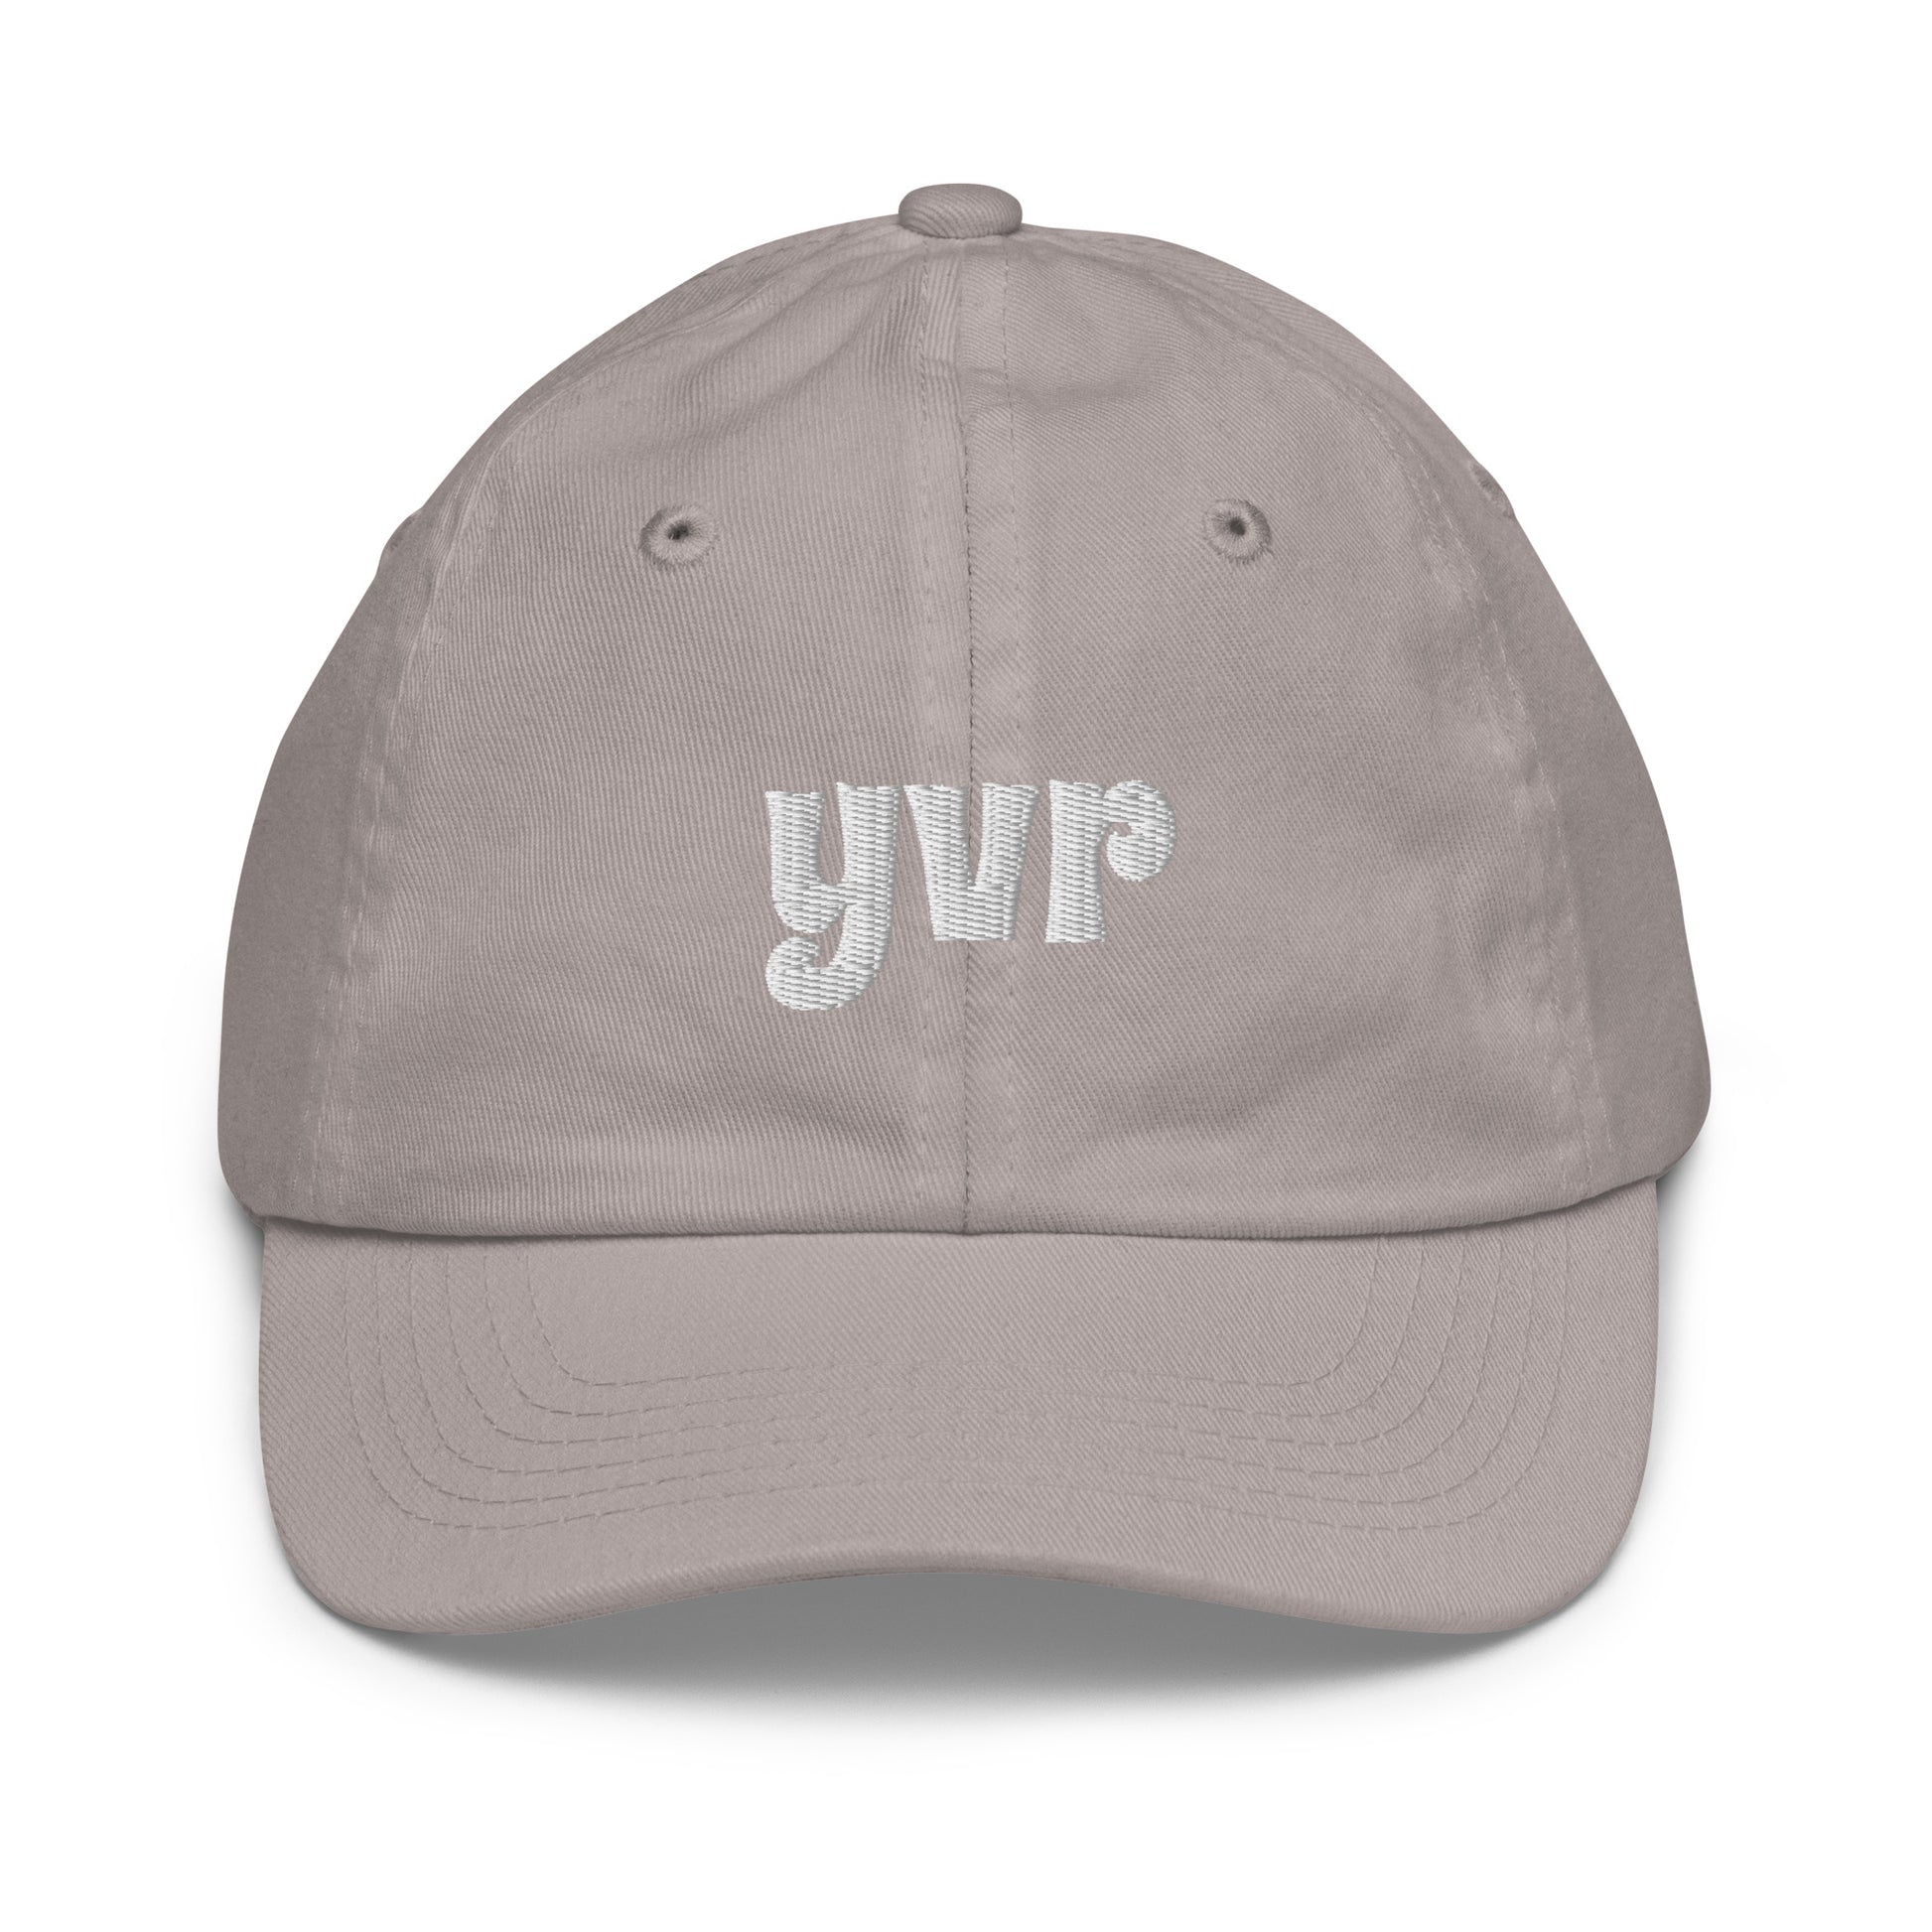 Groovy Kid's Baseball Cap - White • YVR Vancouver • YHM Designs - Image 19